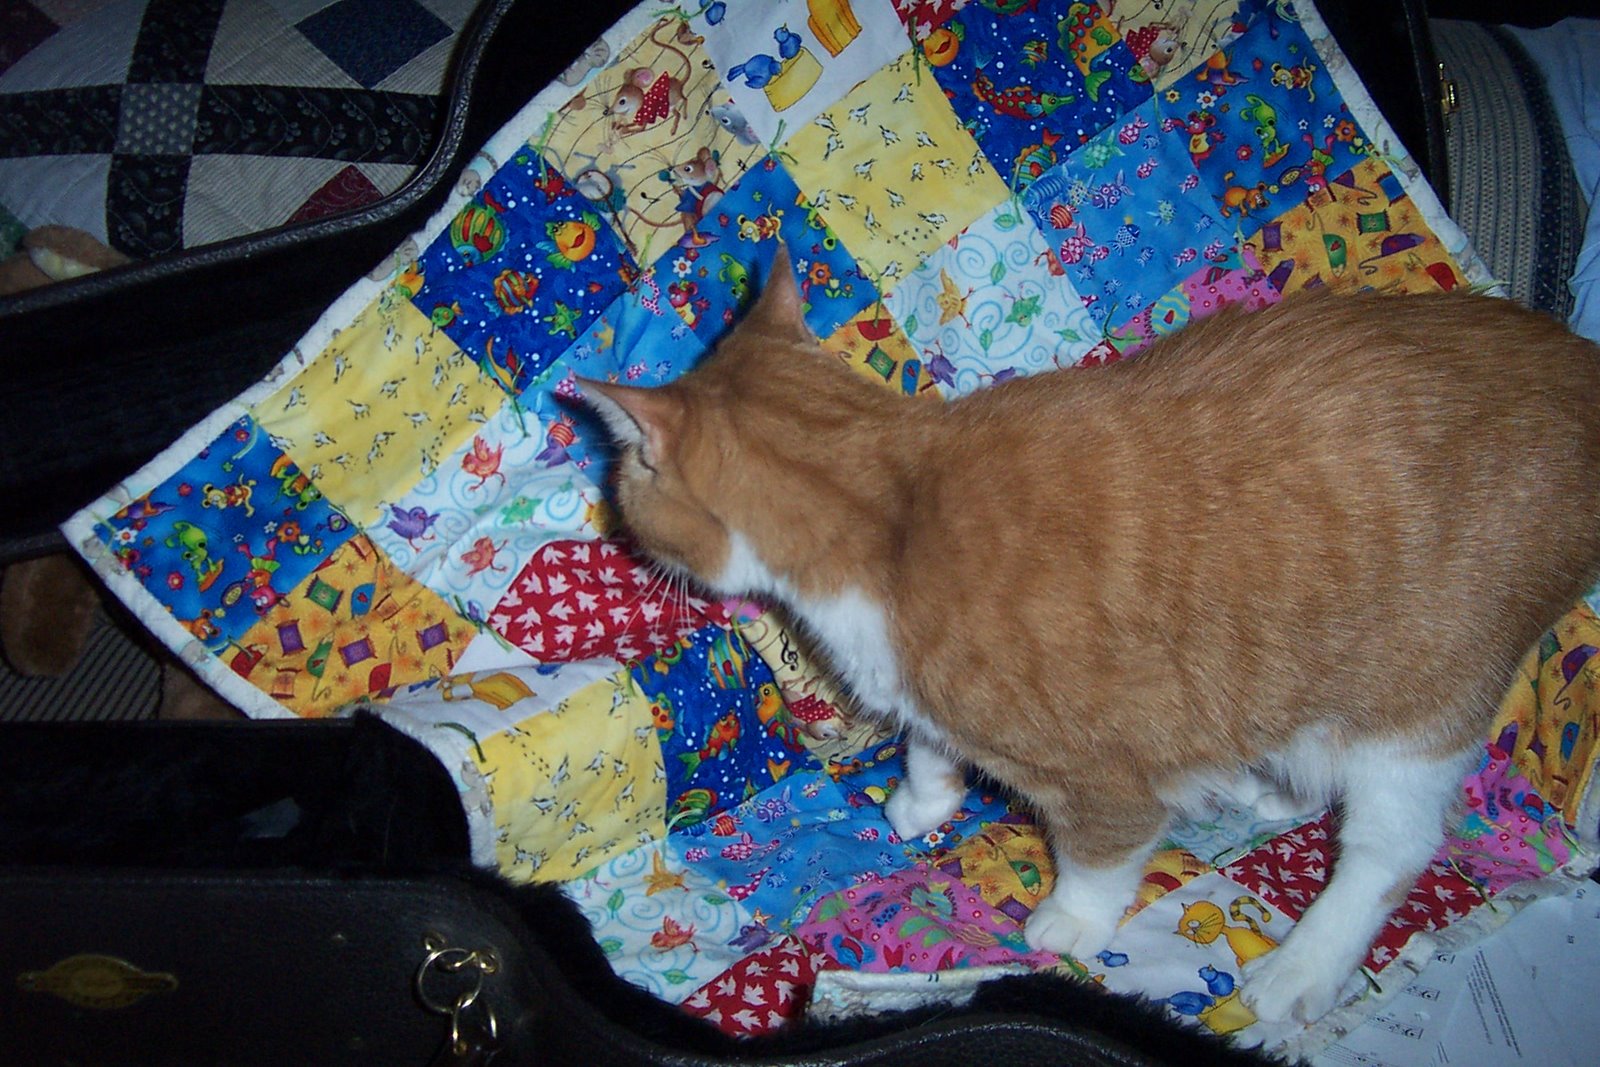 [Sherman+with+quilt_2368.JPG]